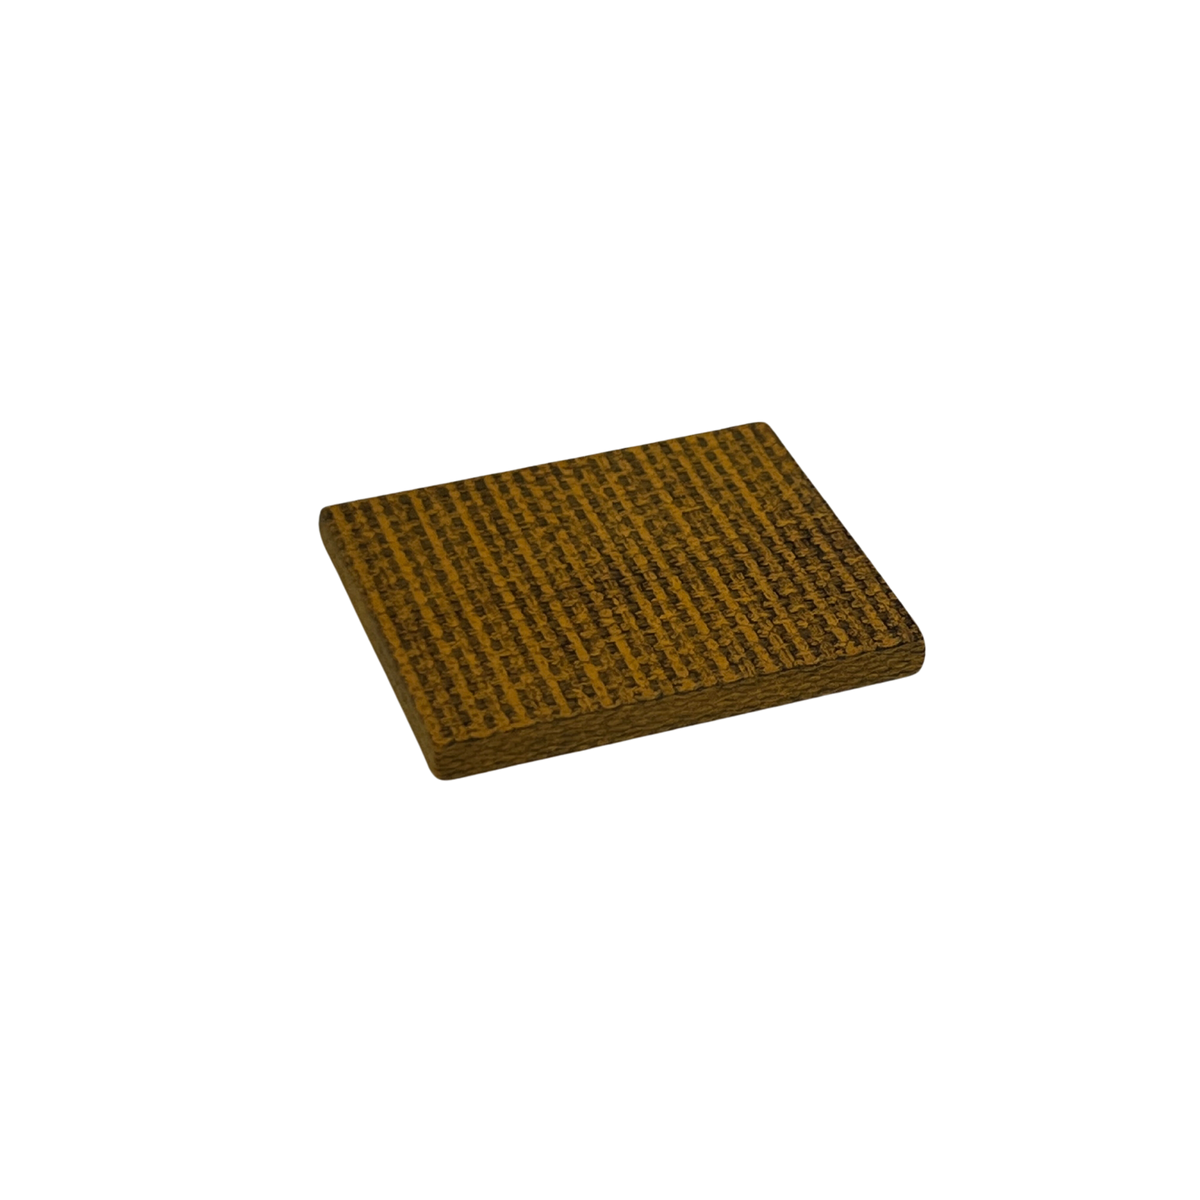 brown woven square object